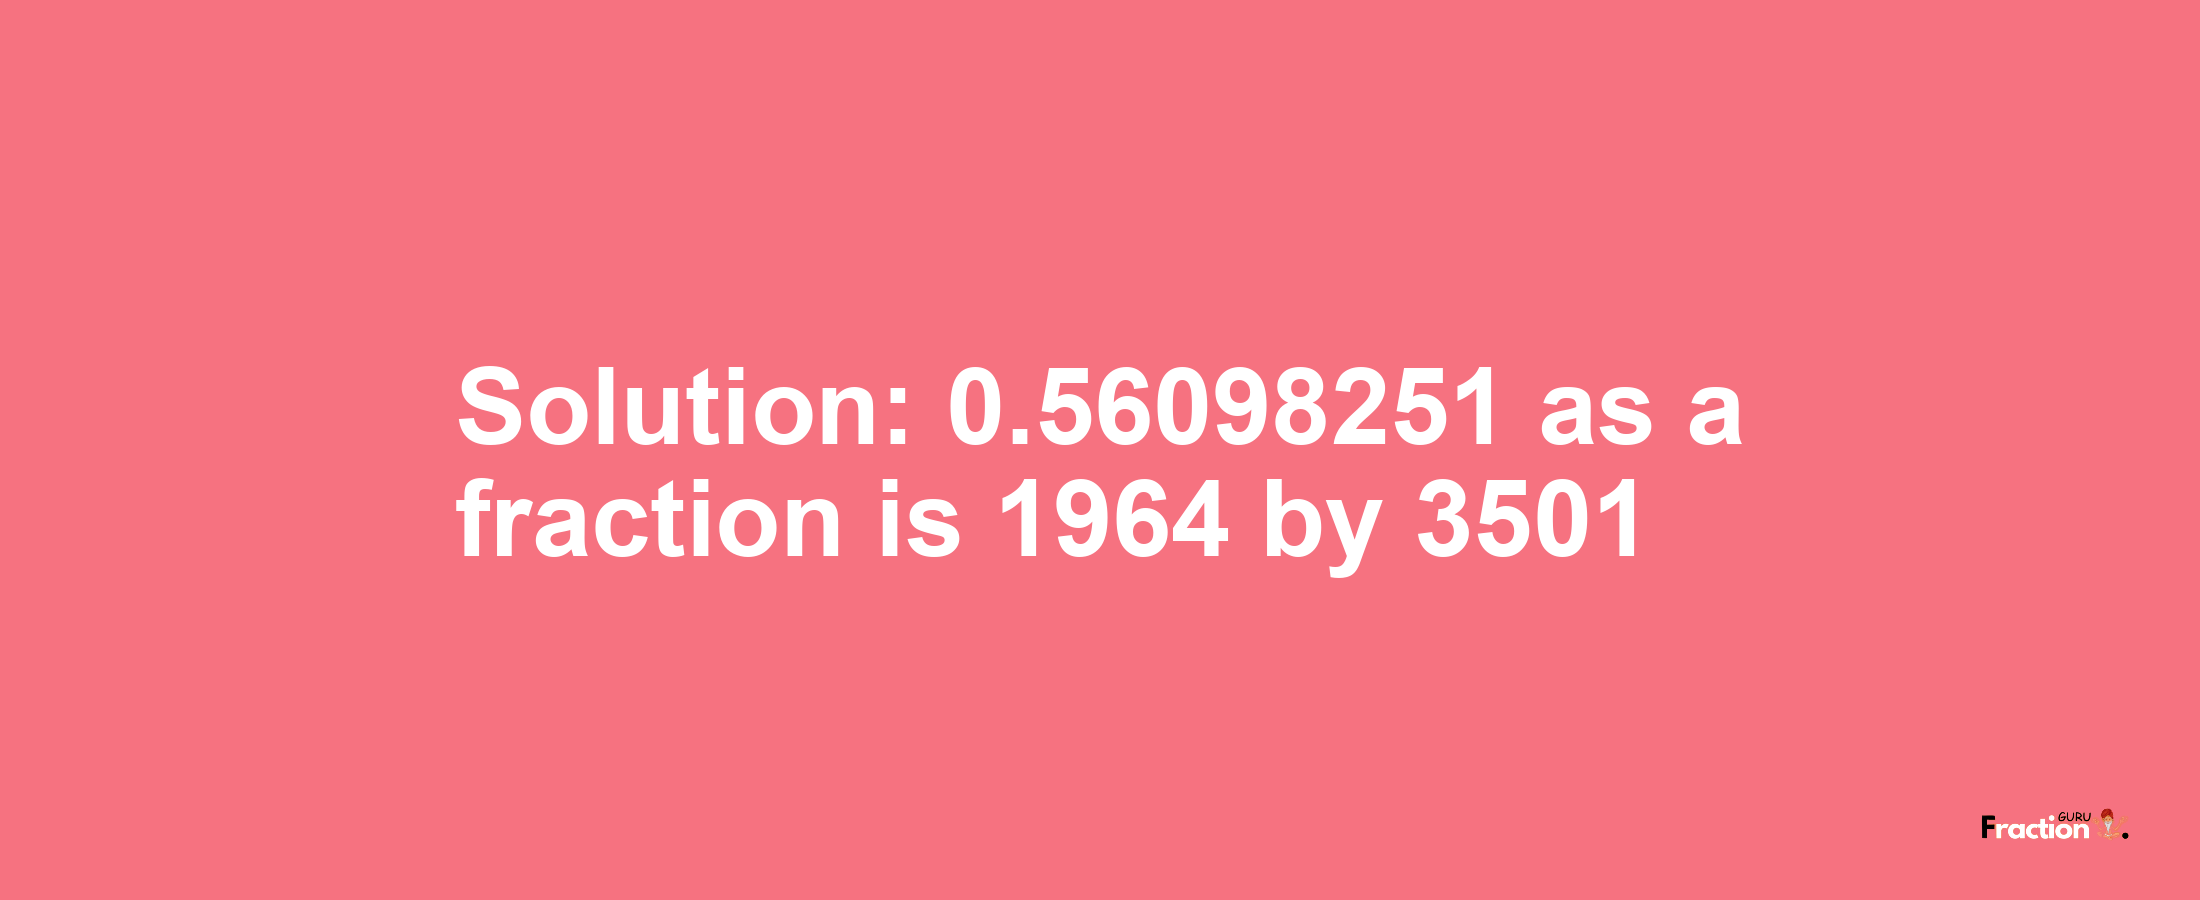 Solution:0.56098251 as a fraction is 1964/3501